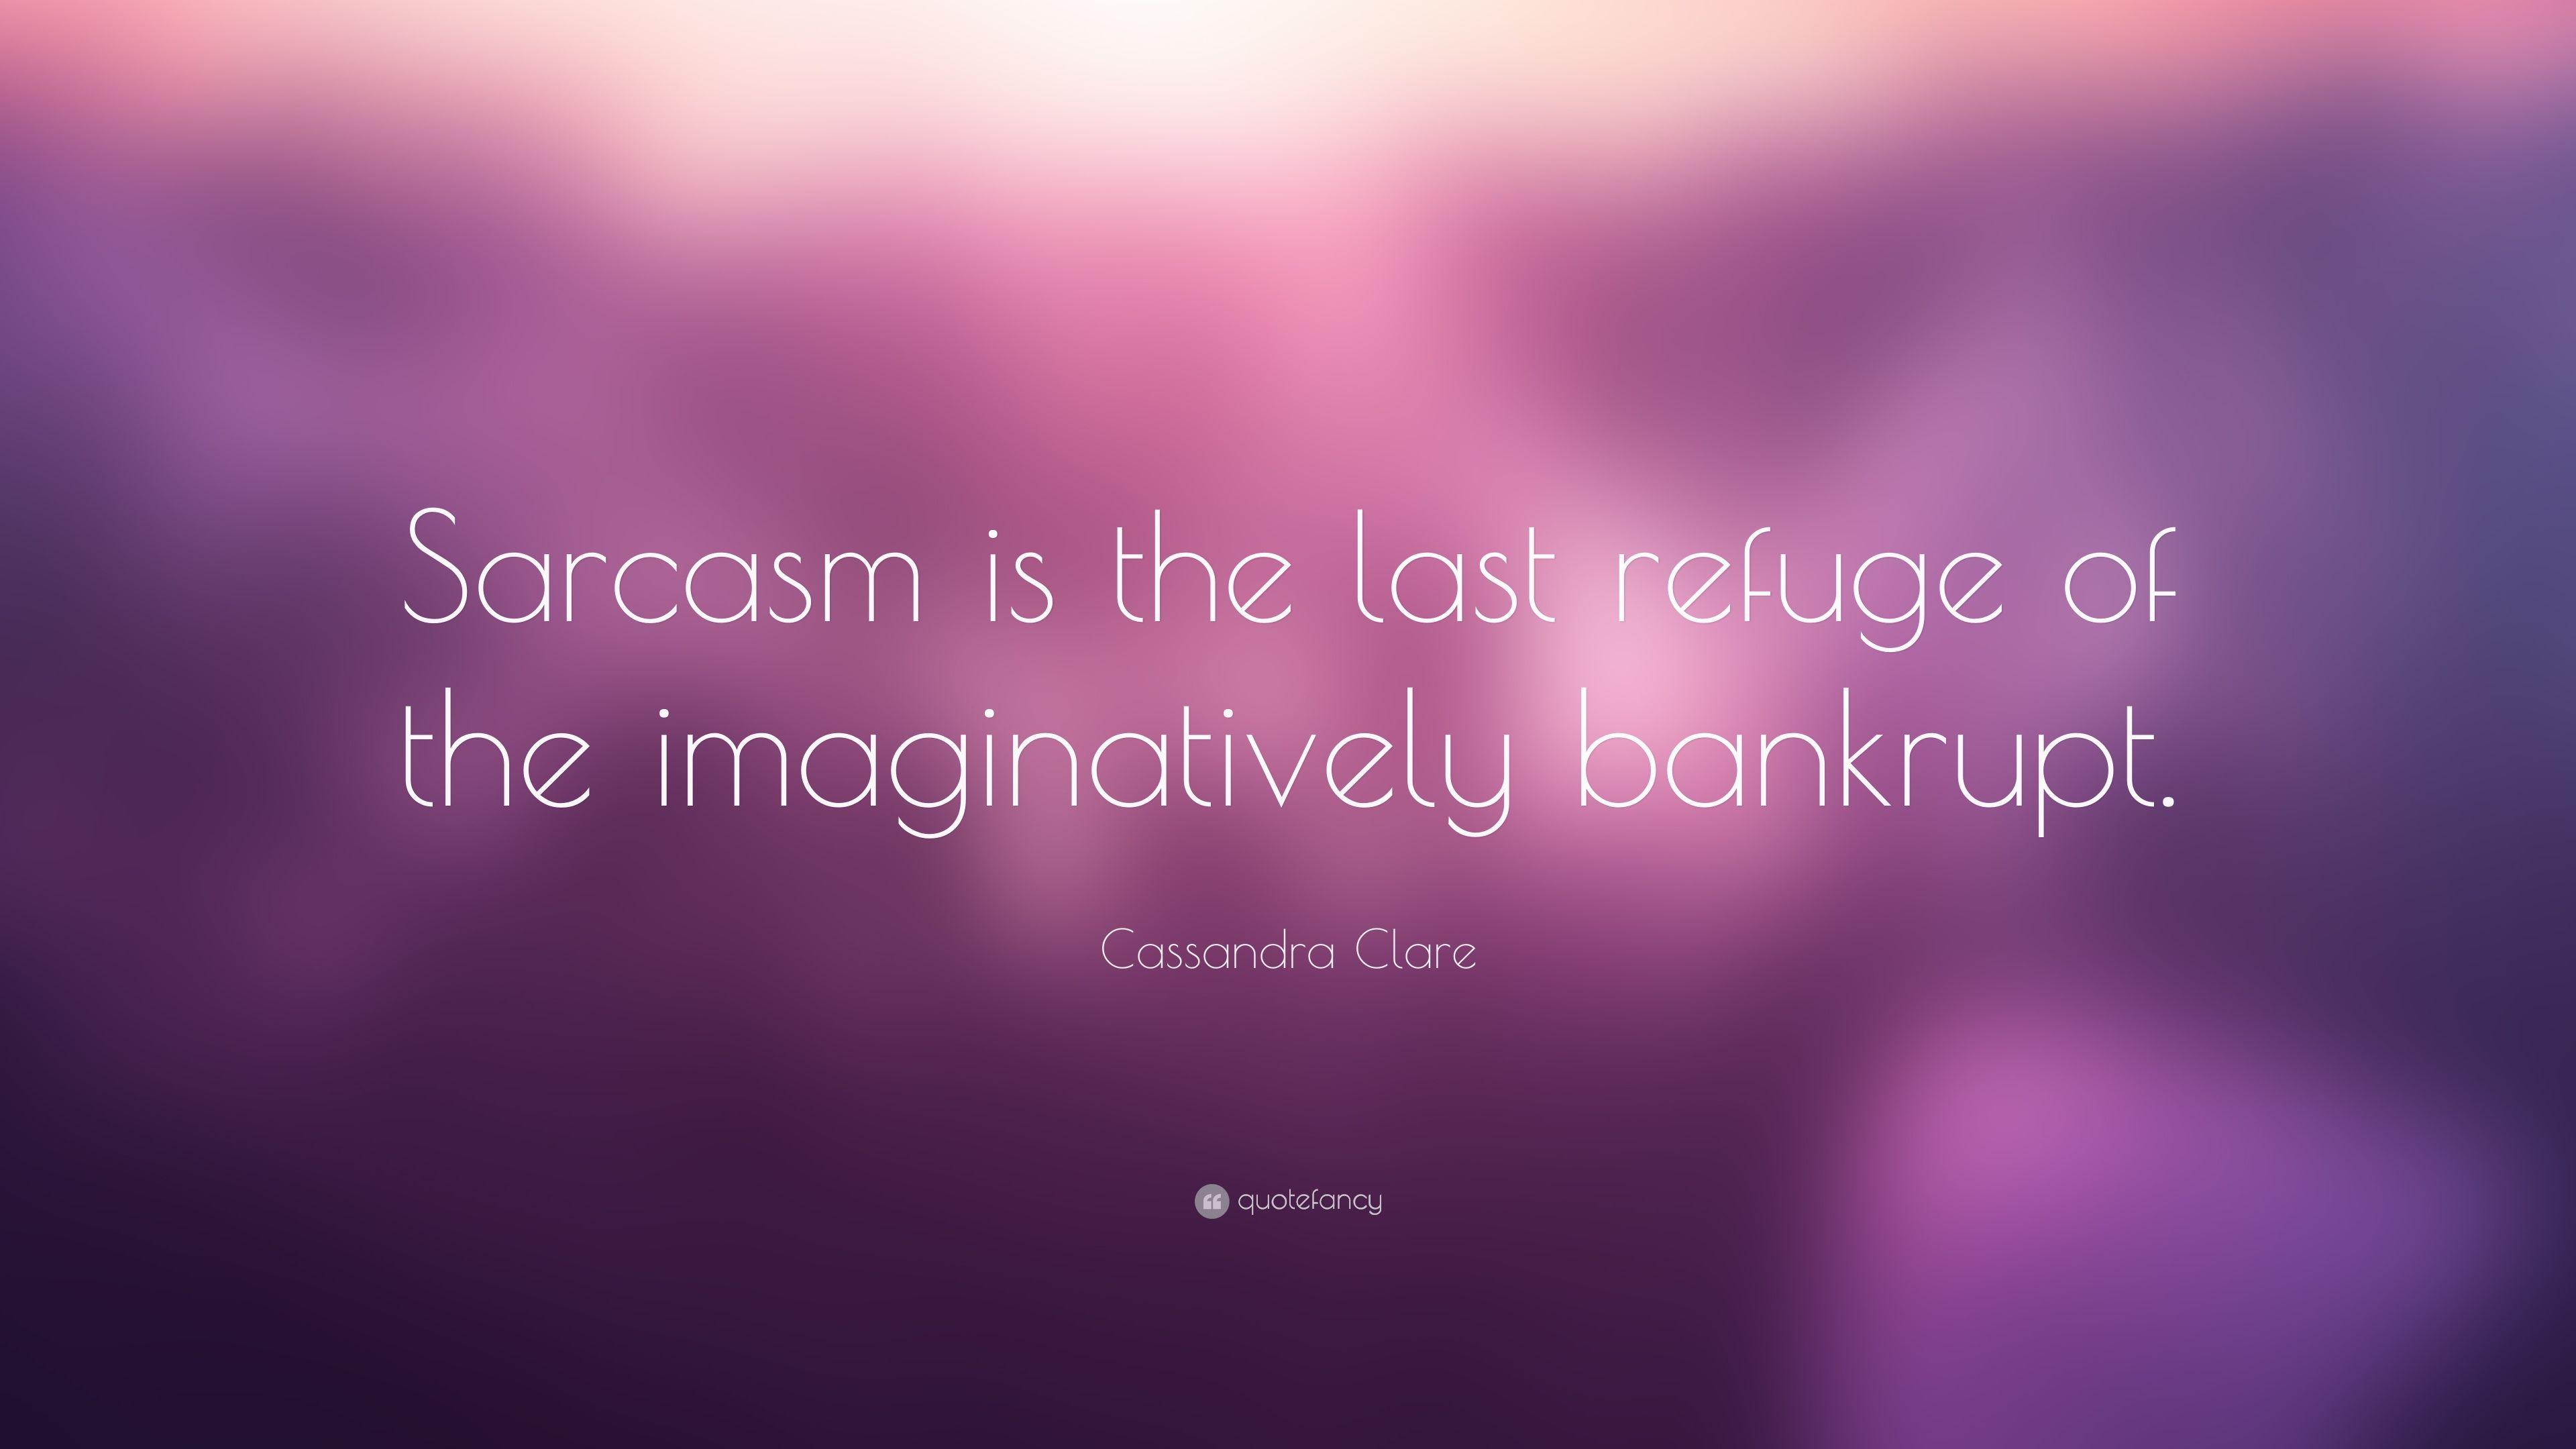 Cassandra Clare Quote: “Sarcasm is the last refuge of the